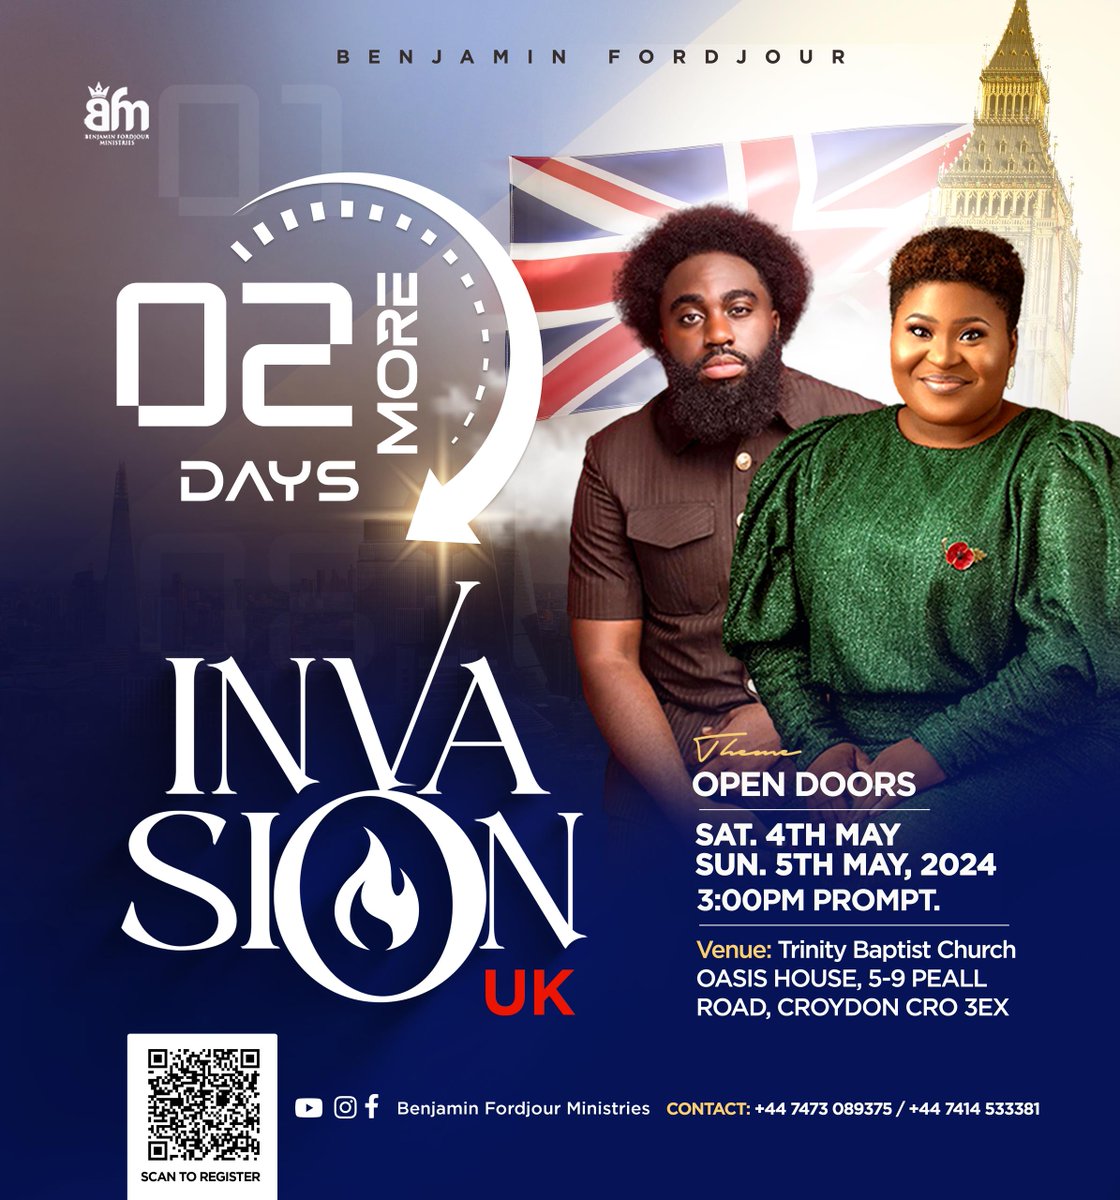 Hurry! Time is running out to register for INVASION UK, a pivotal event in London and Europe. Don't miss out on this free opportunity | May 4th-5th | @tbcoasishouse @EmmanuelSmith_ @officialjudikay @Proph_Benjamin Register FREE >>> eventbrite.co.uk/e/uk-invasion-…